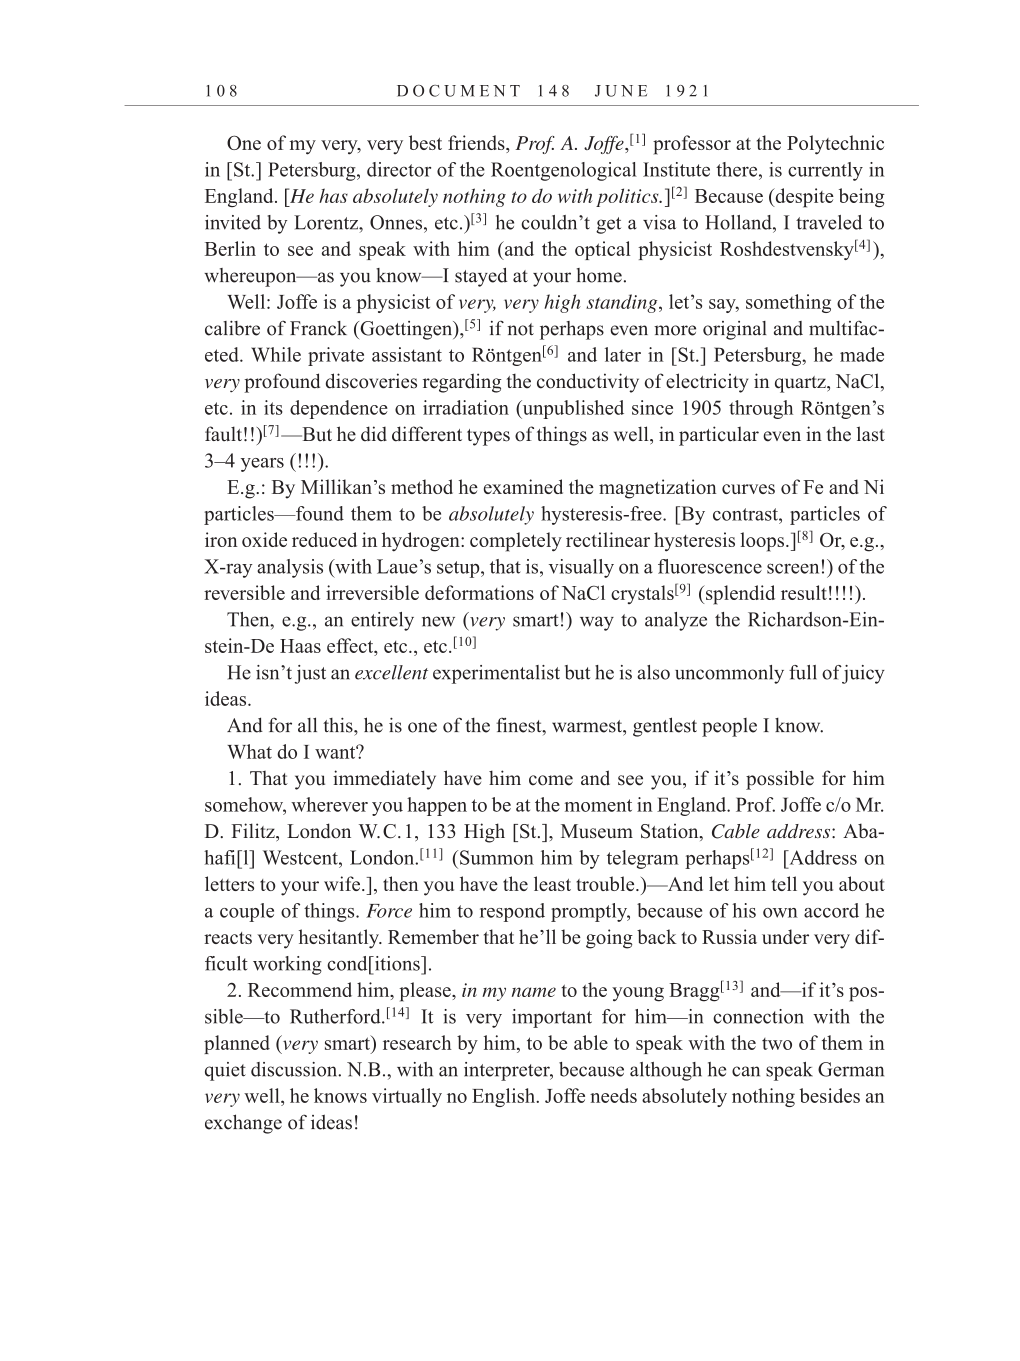 Volume 12: The Berlin Years: Correspondence, January-December 1921 (English translation supplement) page 108